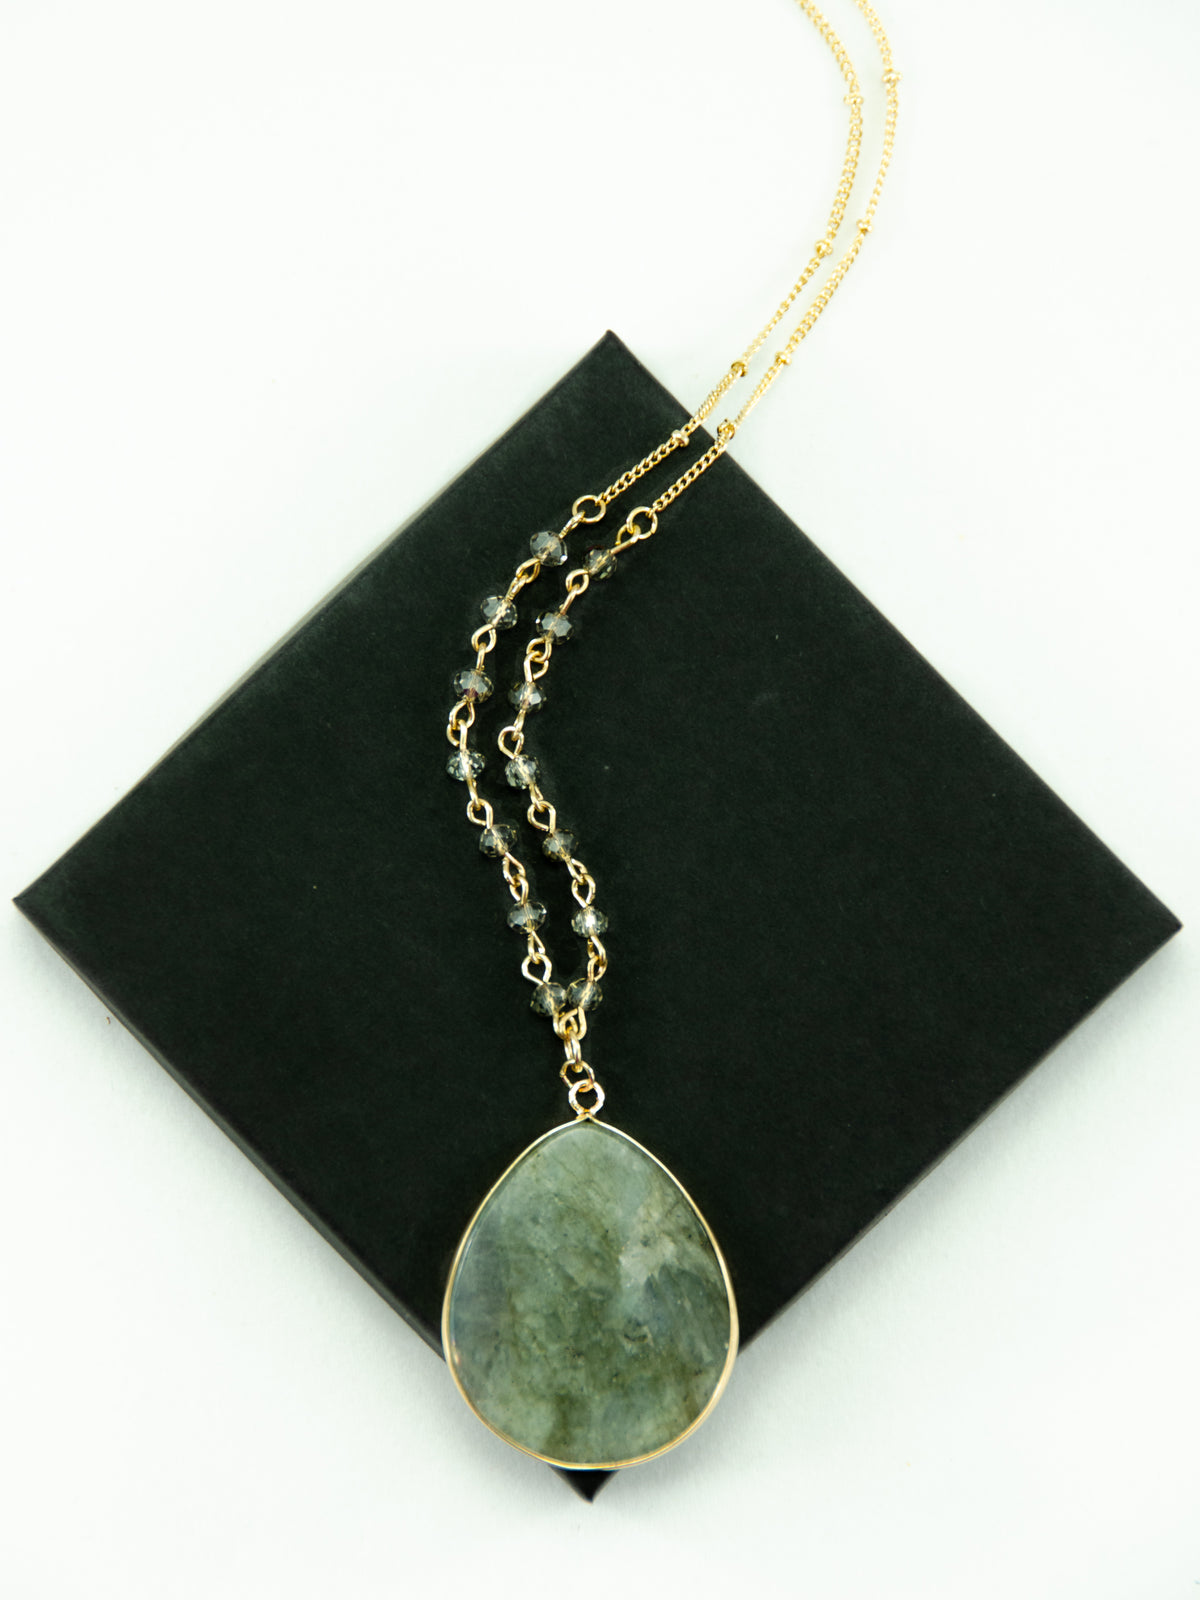 Rock Candy Stone and Beaded Chain Necklace - The Jewelry Bx